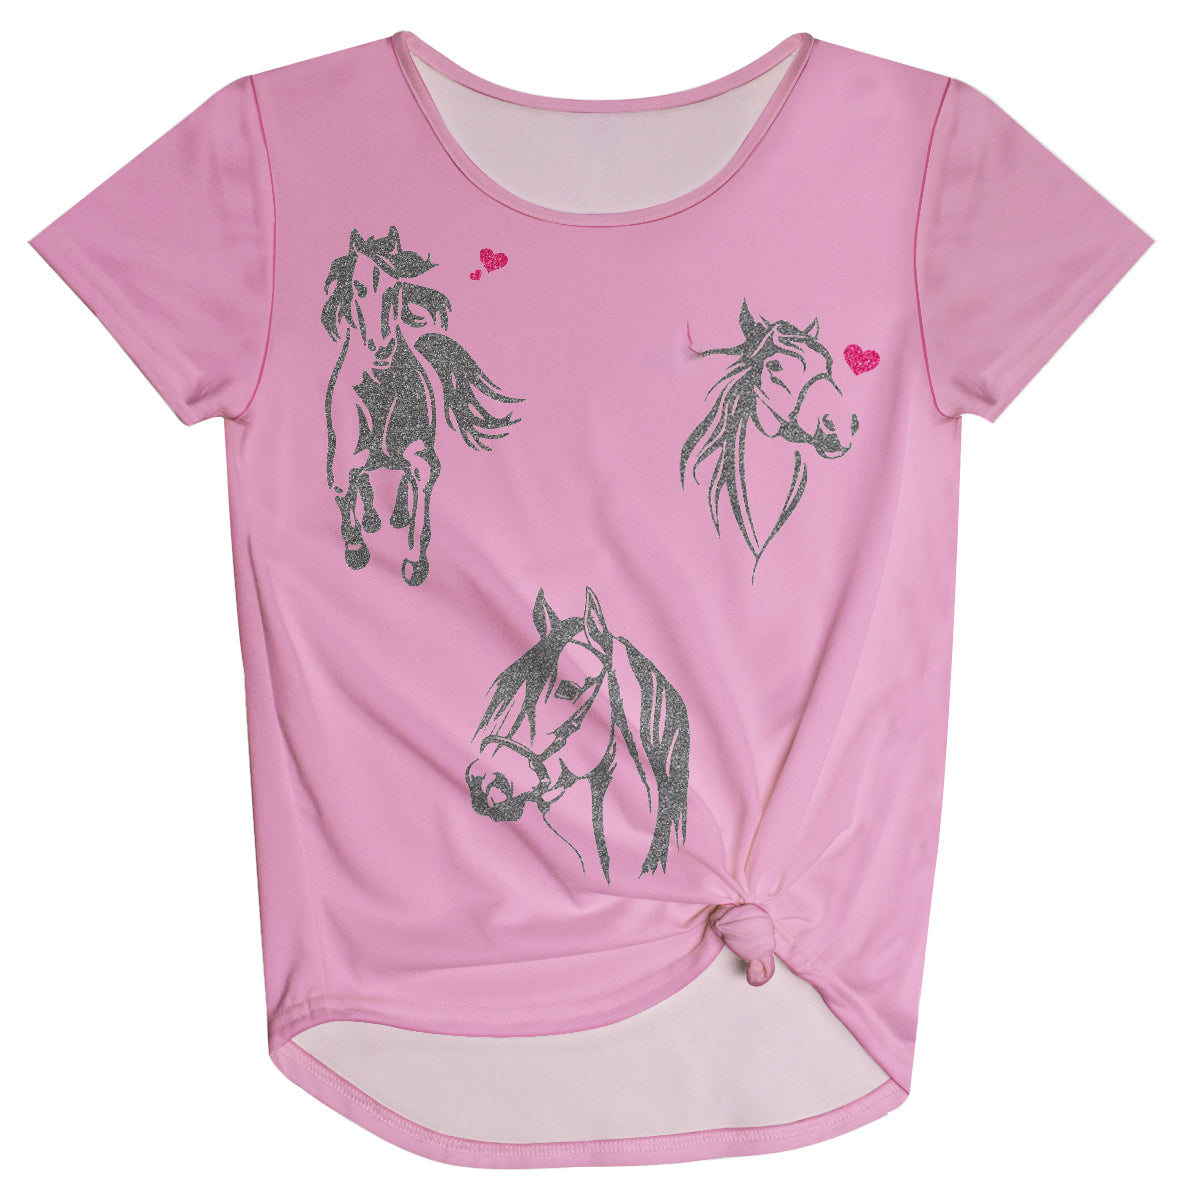 Glitter Horses and Personalized Monogram Pink Knot Top - Wimziy&Co.